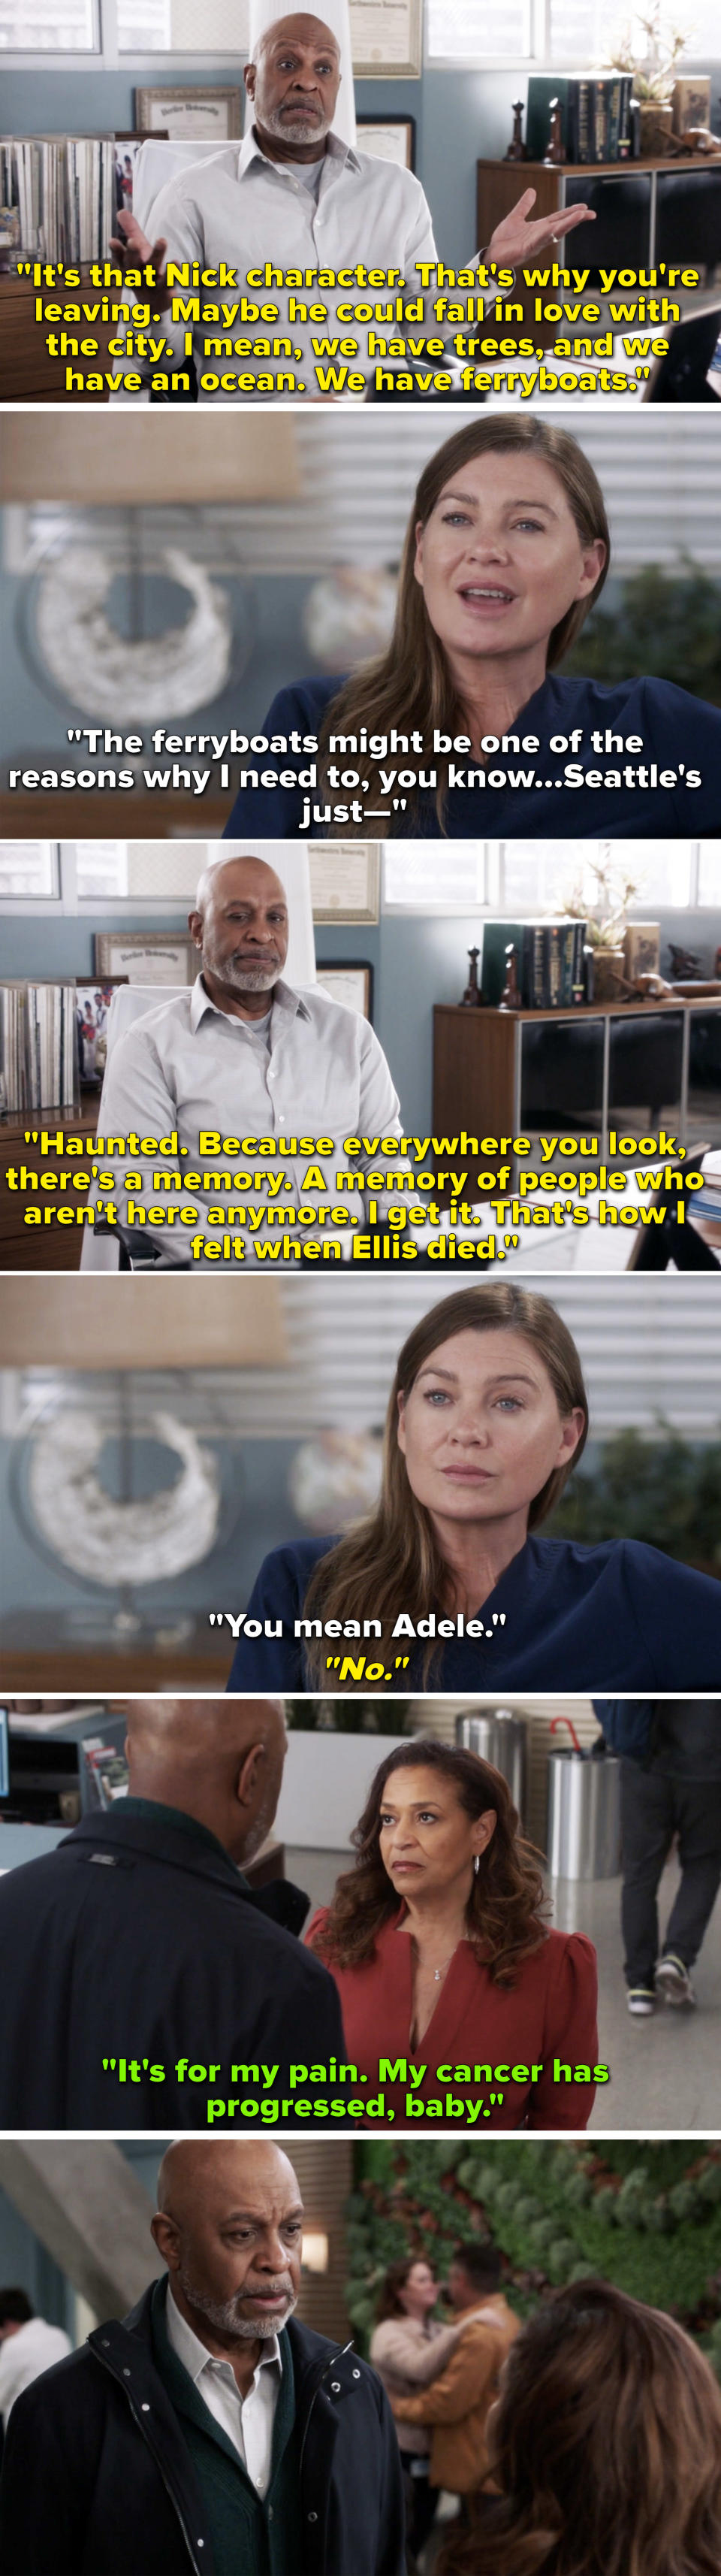 Richard tells Meredith how Seattle is haunted because everywhere, there are memories of people who aren't there anymore, like Ellis